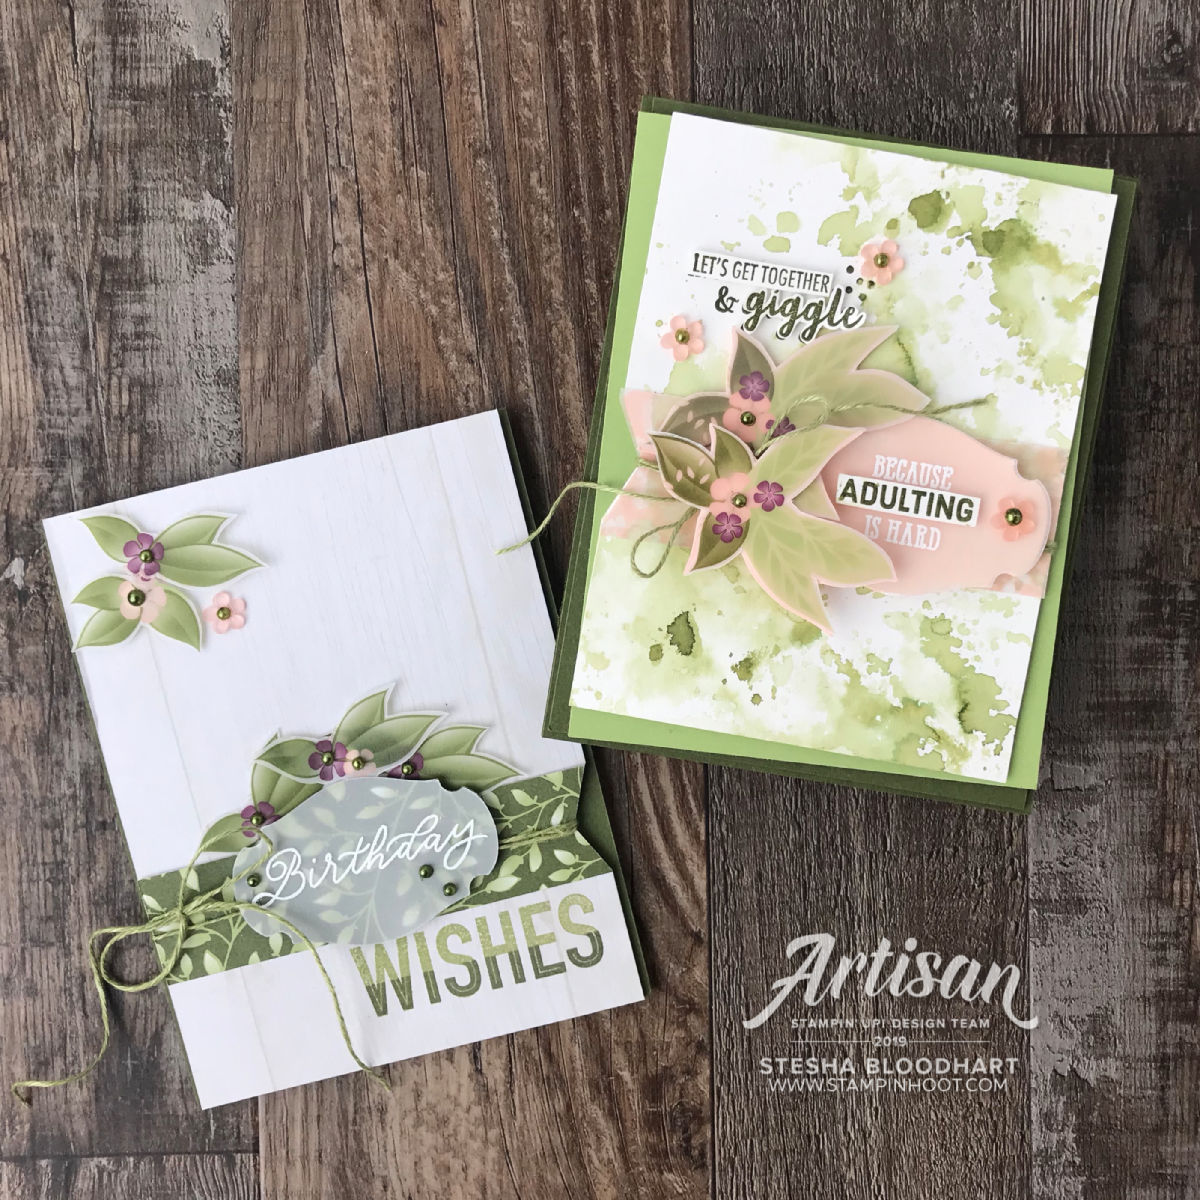 More Than Words Stamp Set & Story Label Punch by Stampin' Up! Created by 2019 Artisan Design Team Member #steshabloodhart #stampinhoot